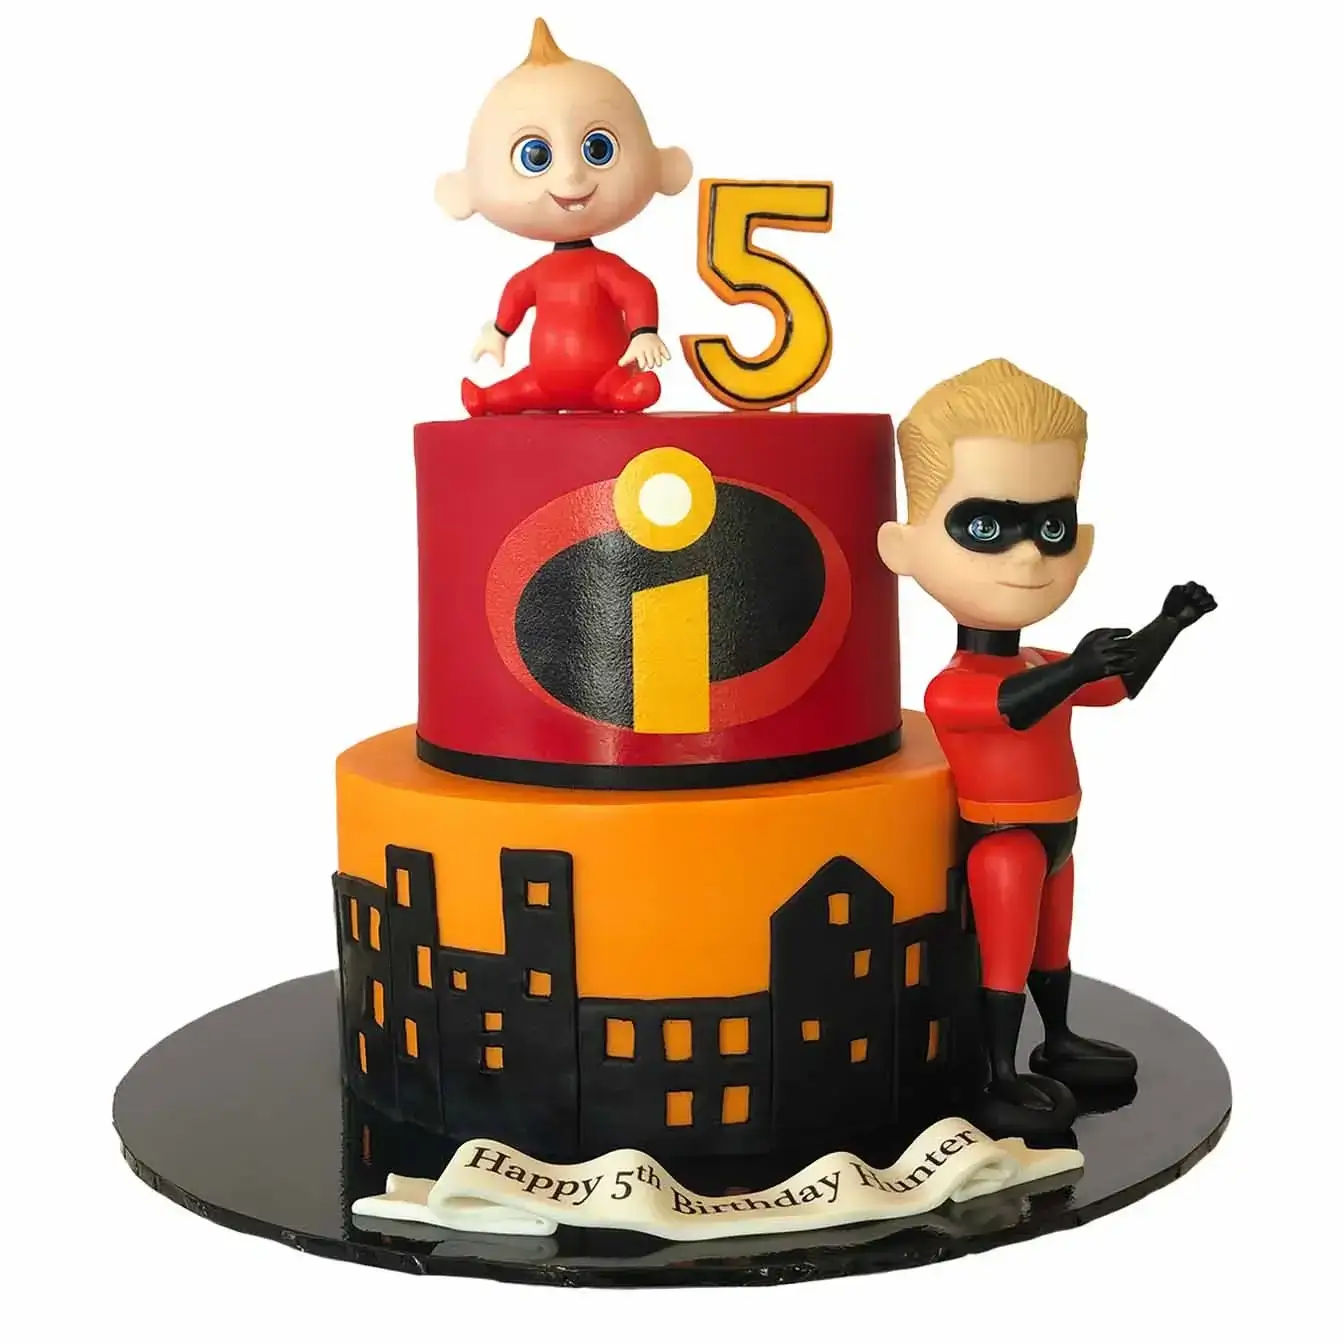 Incredibles Cityscape Cake - A two-tier cake with an Incredibles logo on the red top tier, a black city skyline cutout on the orange bottom tier, and Jack Jack and Dash figurines, a thrilling centerpiece for superhero-themed celebrations.